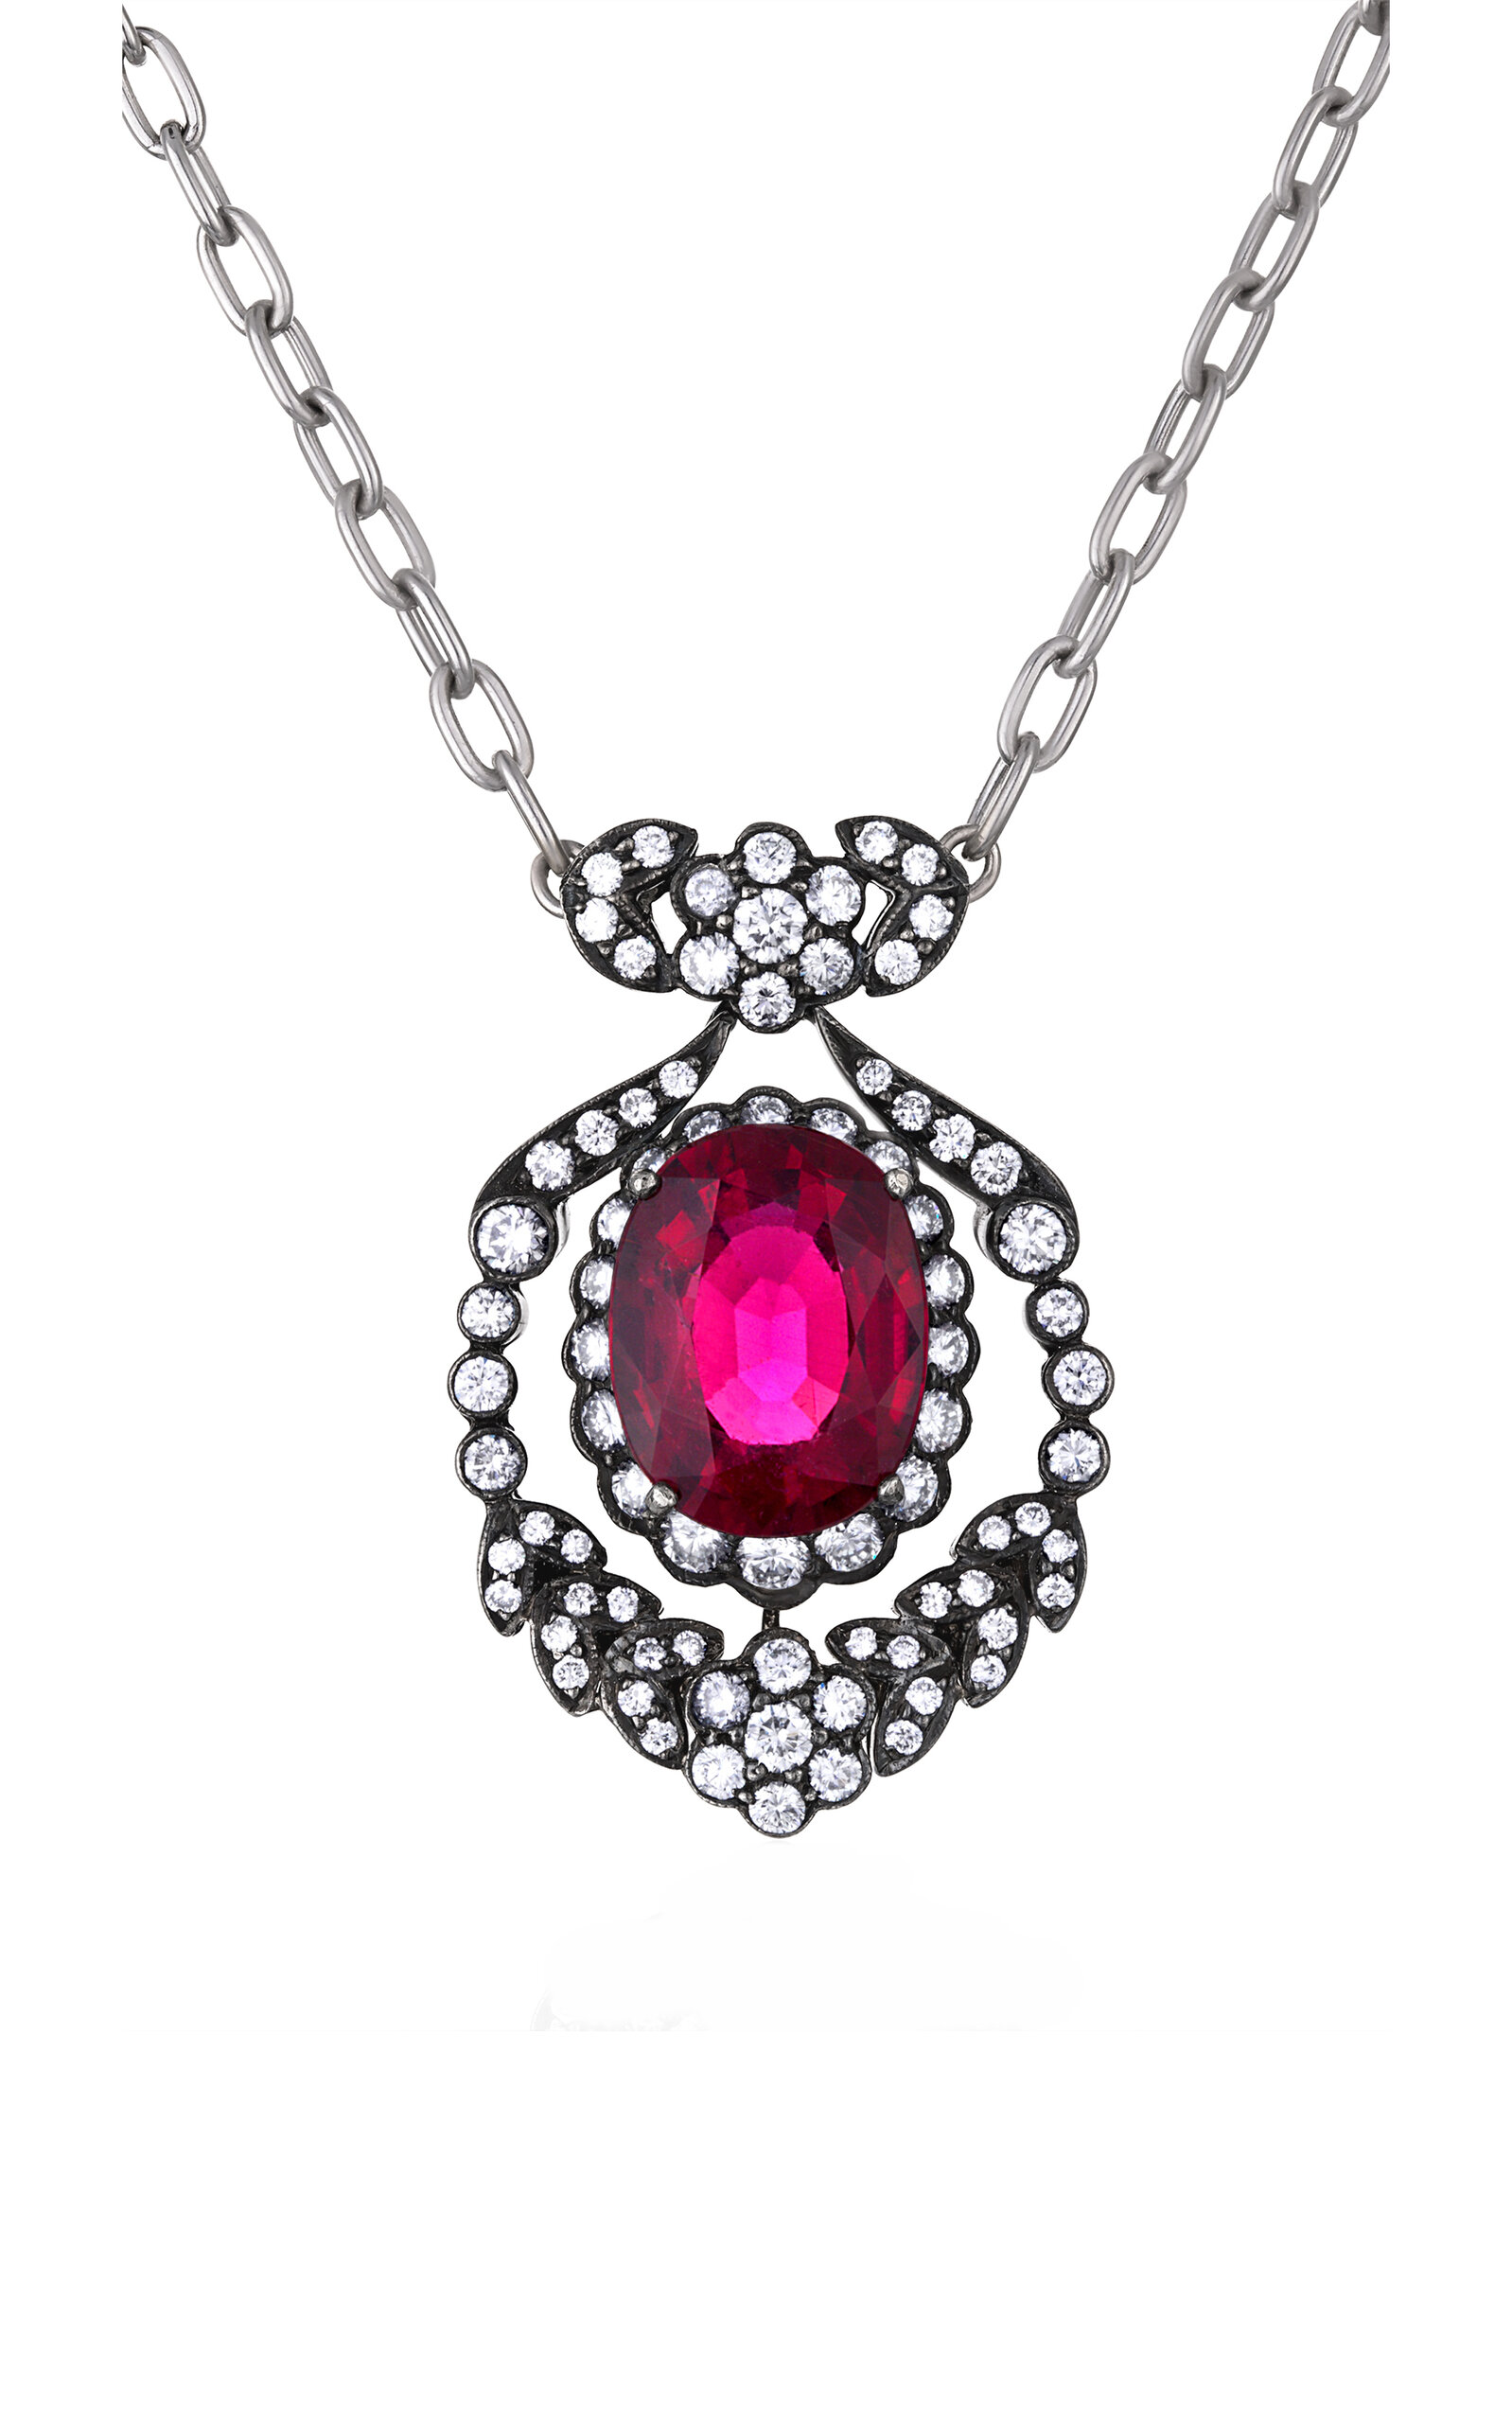 One-of-a-Kind 18K White Gold & Silver Rubellite; Diamond Necklace